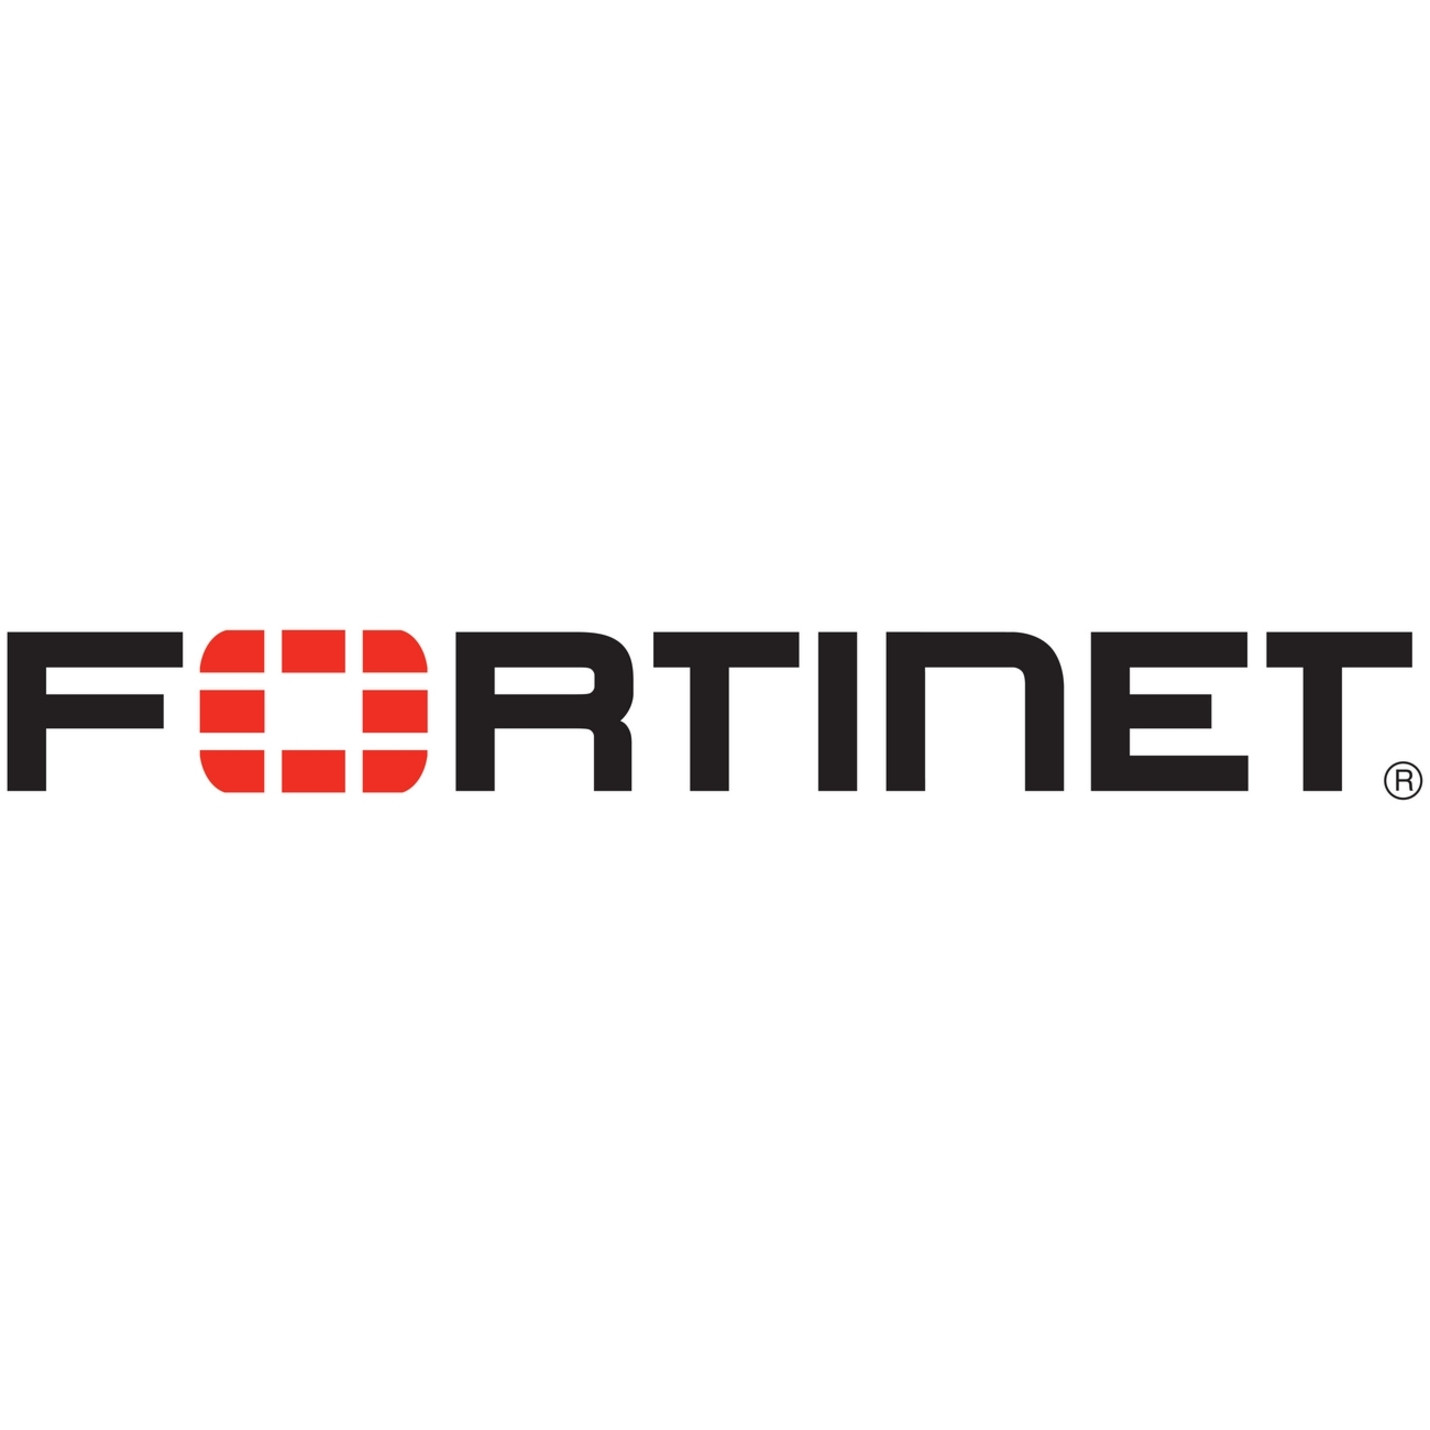 Fortinet Secured Network Deployment & Virtual Private Networks3013 Day FT-03301